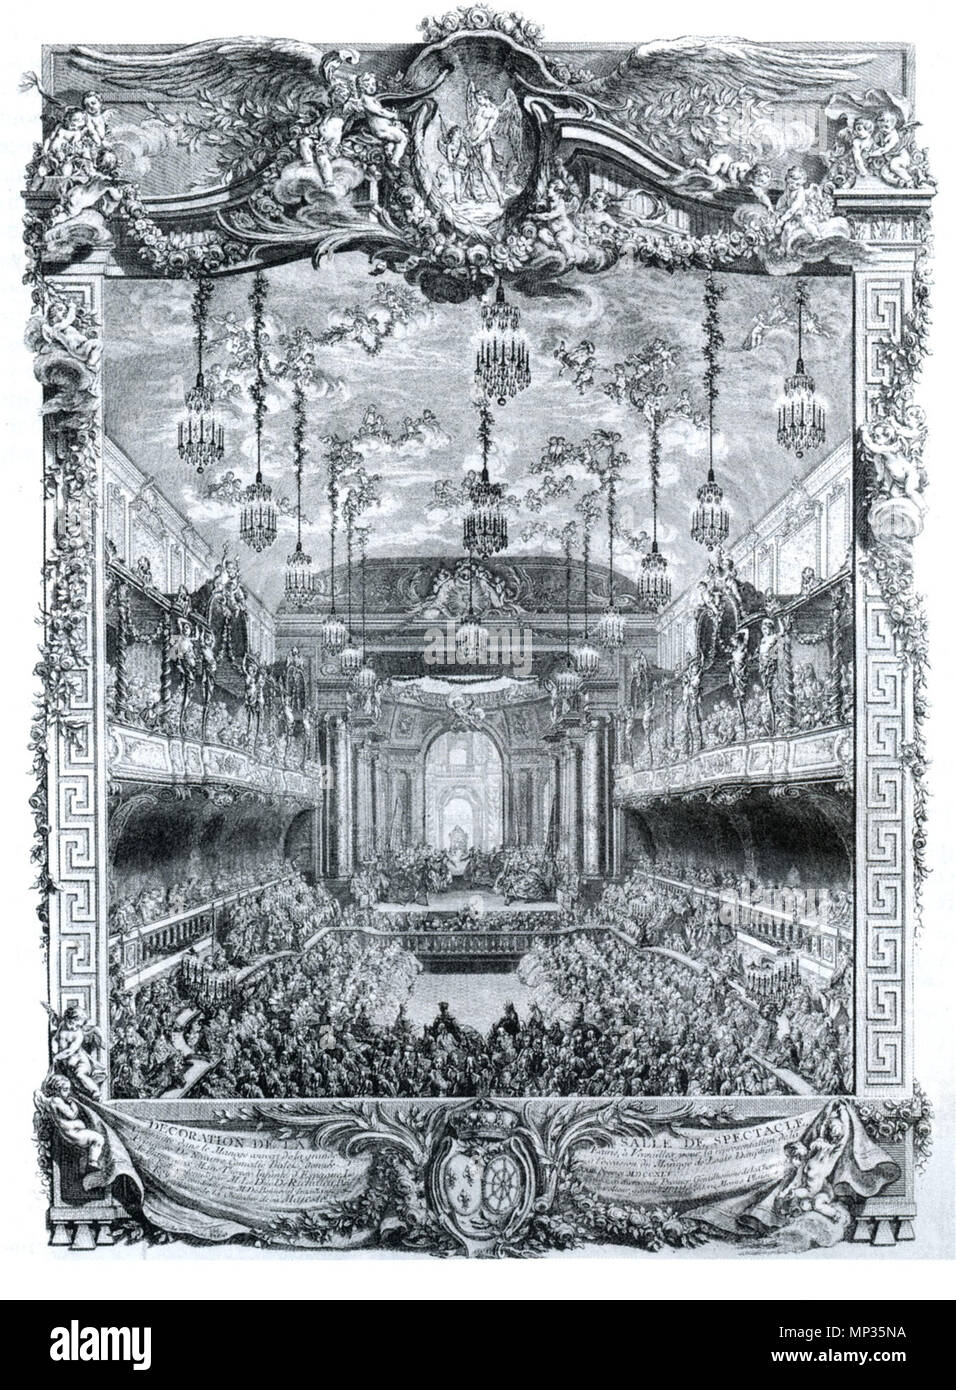 . English: A performance of Rameau's La princesse de Navarre on 23 February 1745 in the theatre of the Grande Écurie, Versailles, as part of the celebrations of the marriage of the dauphin Louis to Maria Teresa of Spain. circa 1745. Charles-Nicolas Cochin (1715–1790), engraver 973 Performance 1745 of La princesse de Navarre by Rameau - NGO3p859 Stock Photo